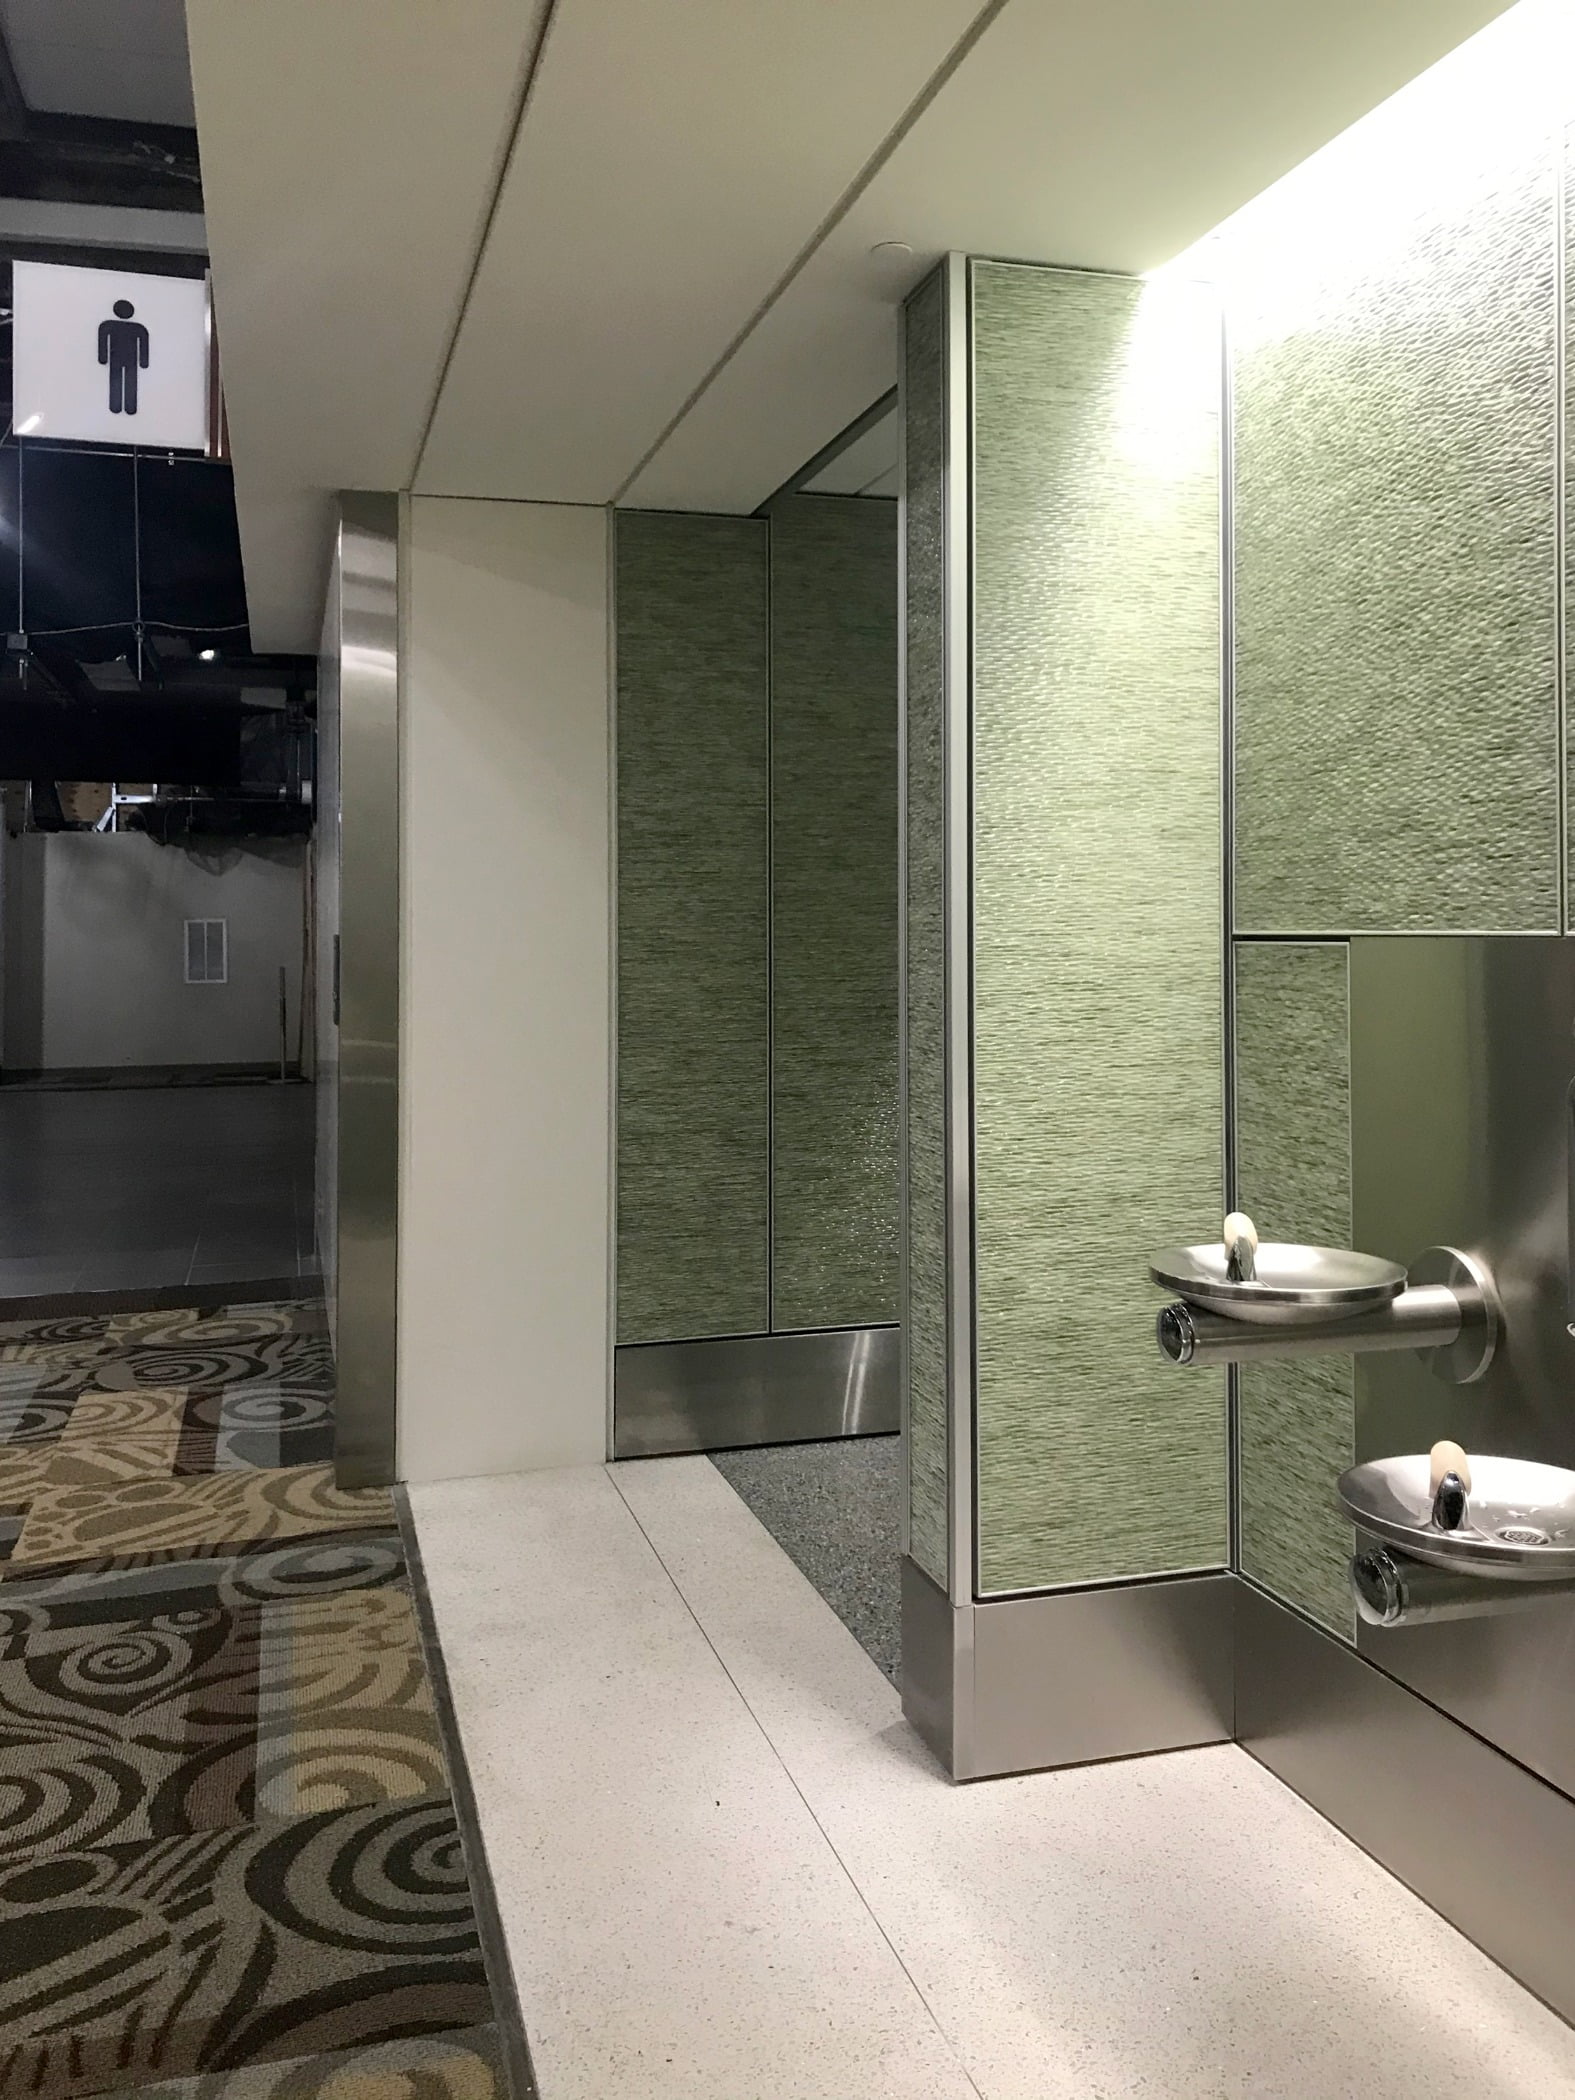 Balco supplied floor pan expansion joint covers and flush mounted wall and ceiling expansion joint covers for wide openings. The low maintenance Terrazzo flooring is an ideal selection for transitions from carpeting to high traffic areas such as restrooms and water fountains.